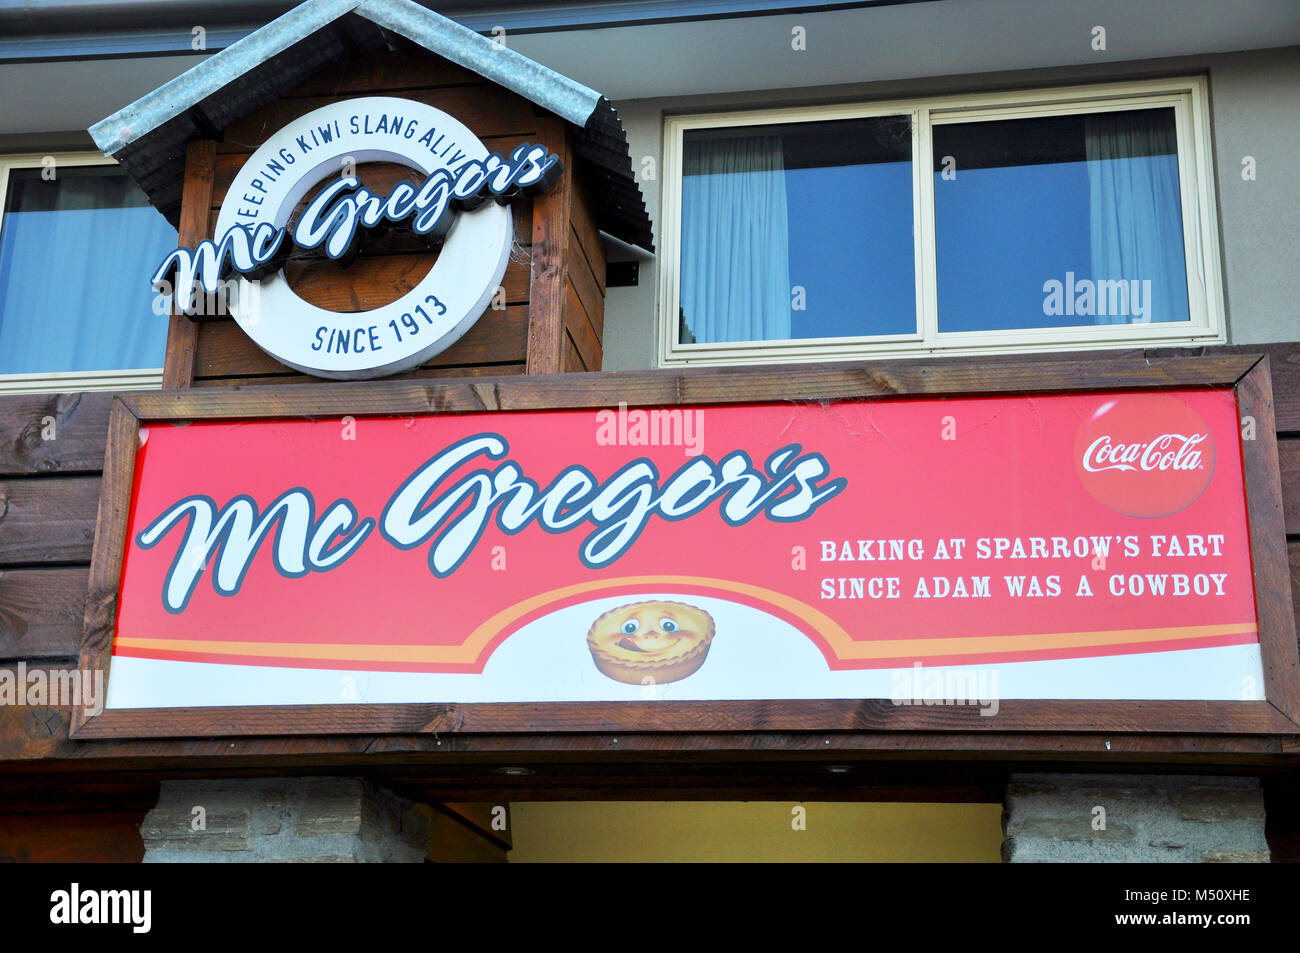 McGregor's bakery, Wanaka New Zealand. Keeping Kiwi slang alive. Baking at sparrow's fart since adam was a cowboy. Shop front sign. Humorous Stock Photo